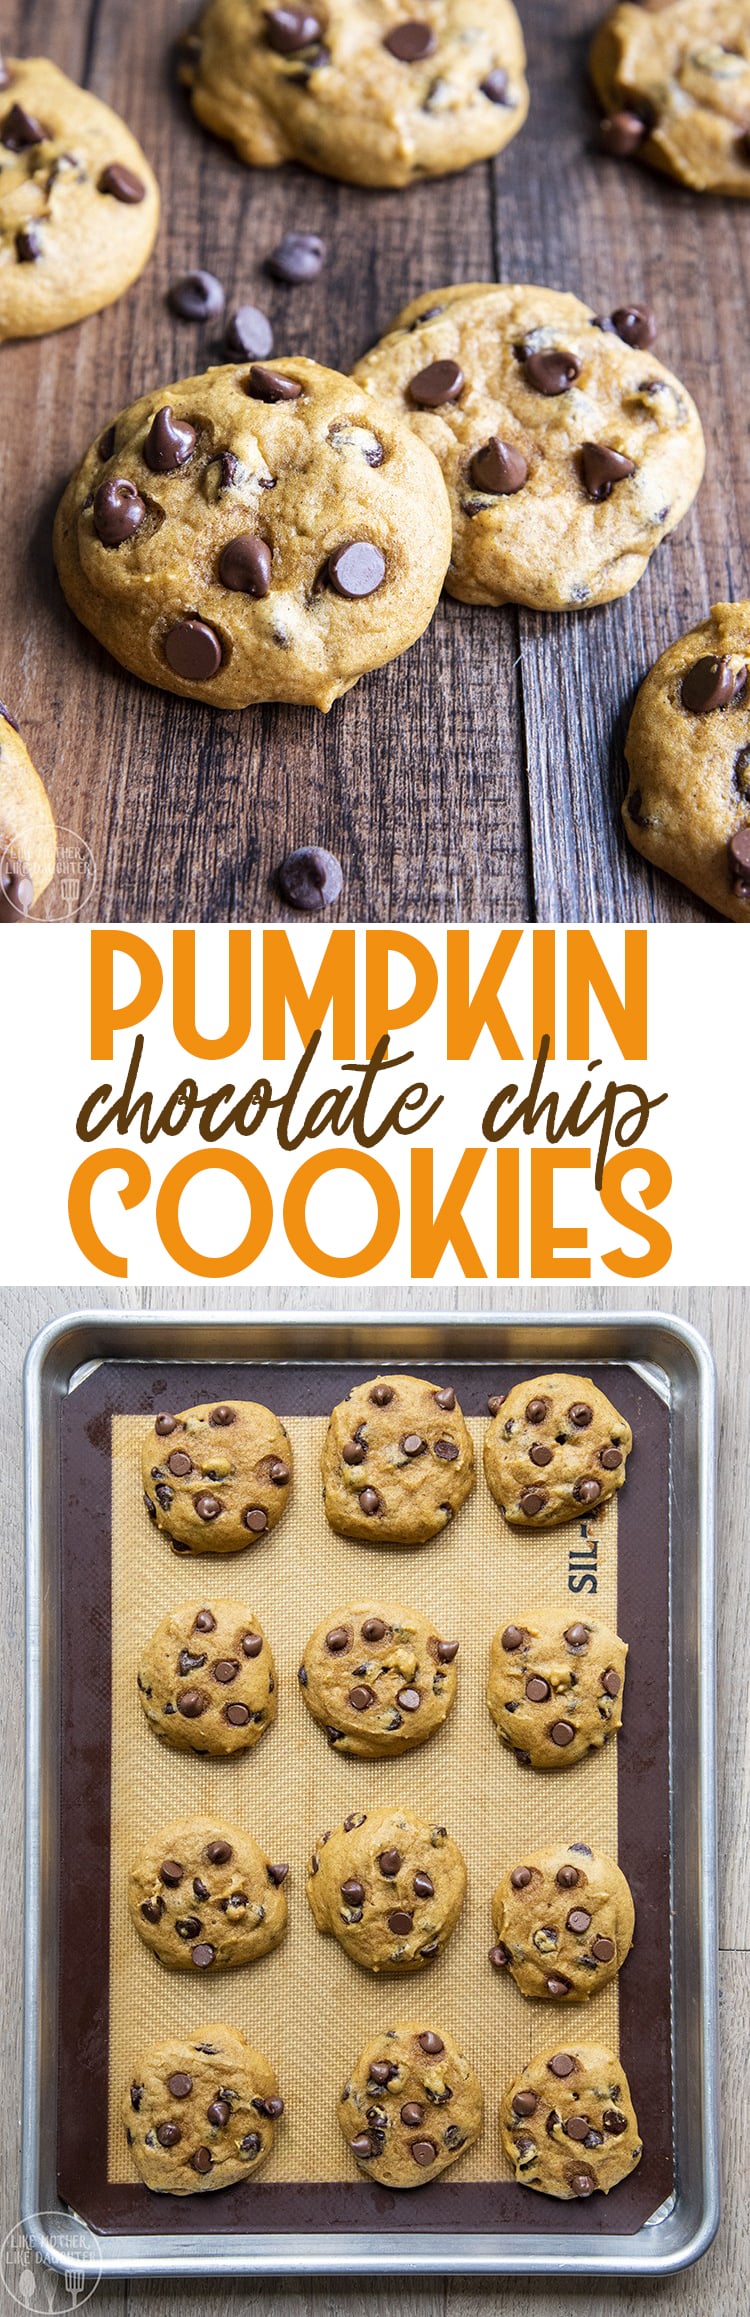 These pumpkin chocolate chip cookies are are soft, moist, and loaded with the perfect pumpkin flavor. They're the best fall cookies.